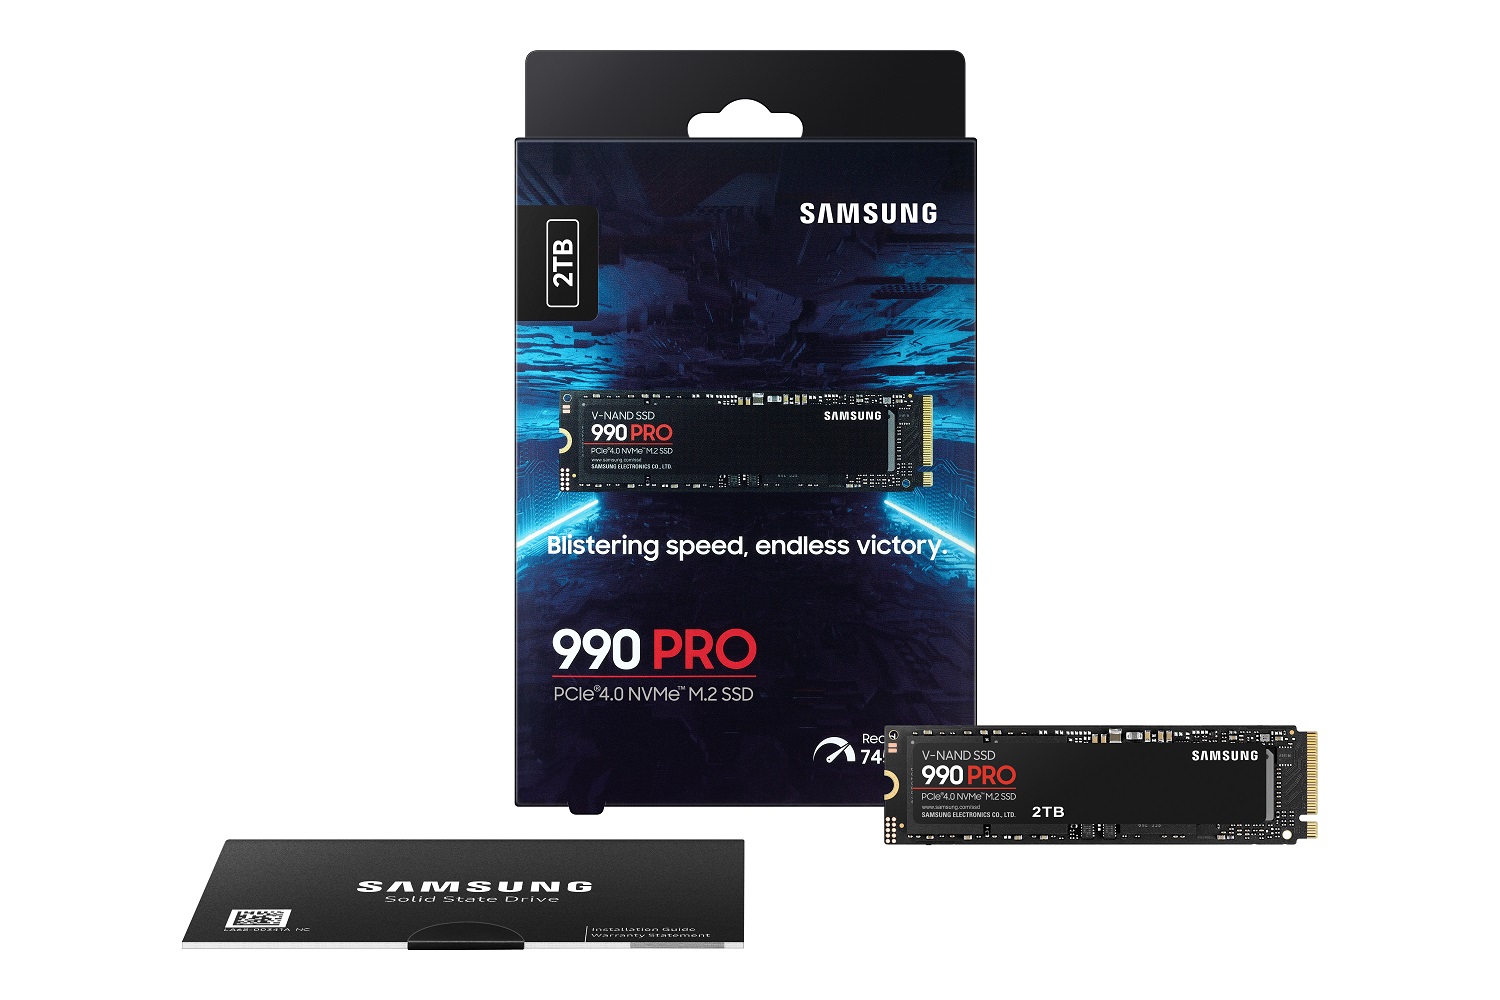 Samsung 990 Pro SSD with its box.